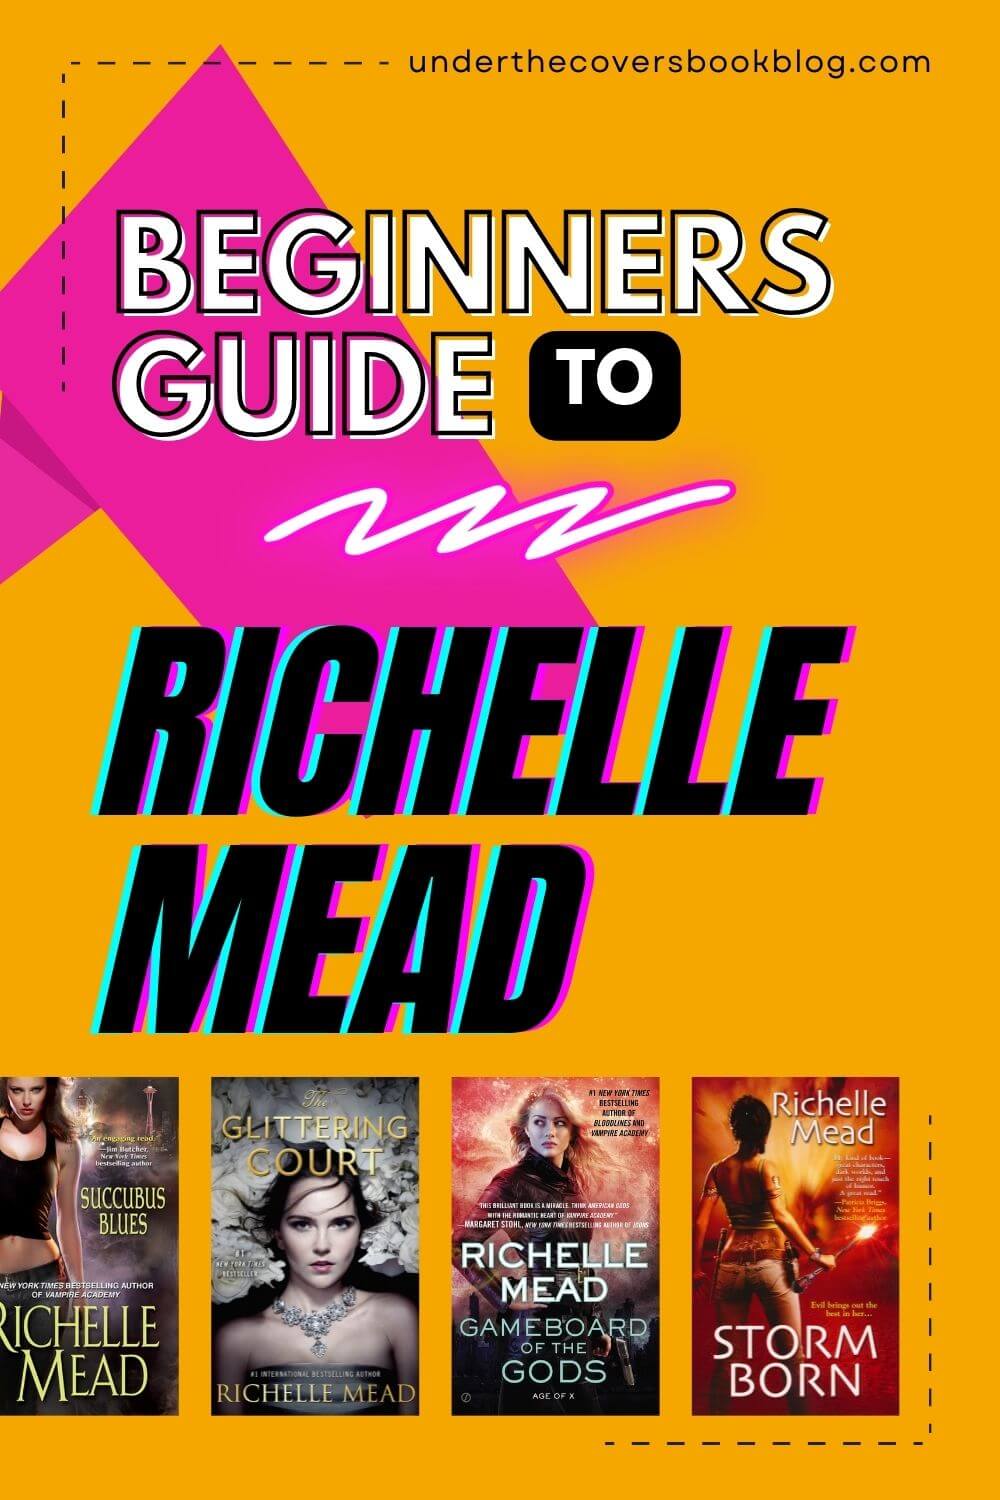 A Beginners Guide to Reading Books by Richelle Mead